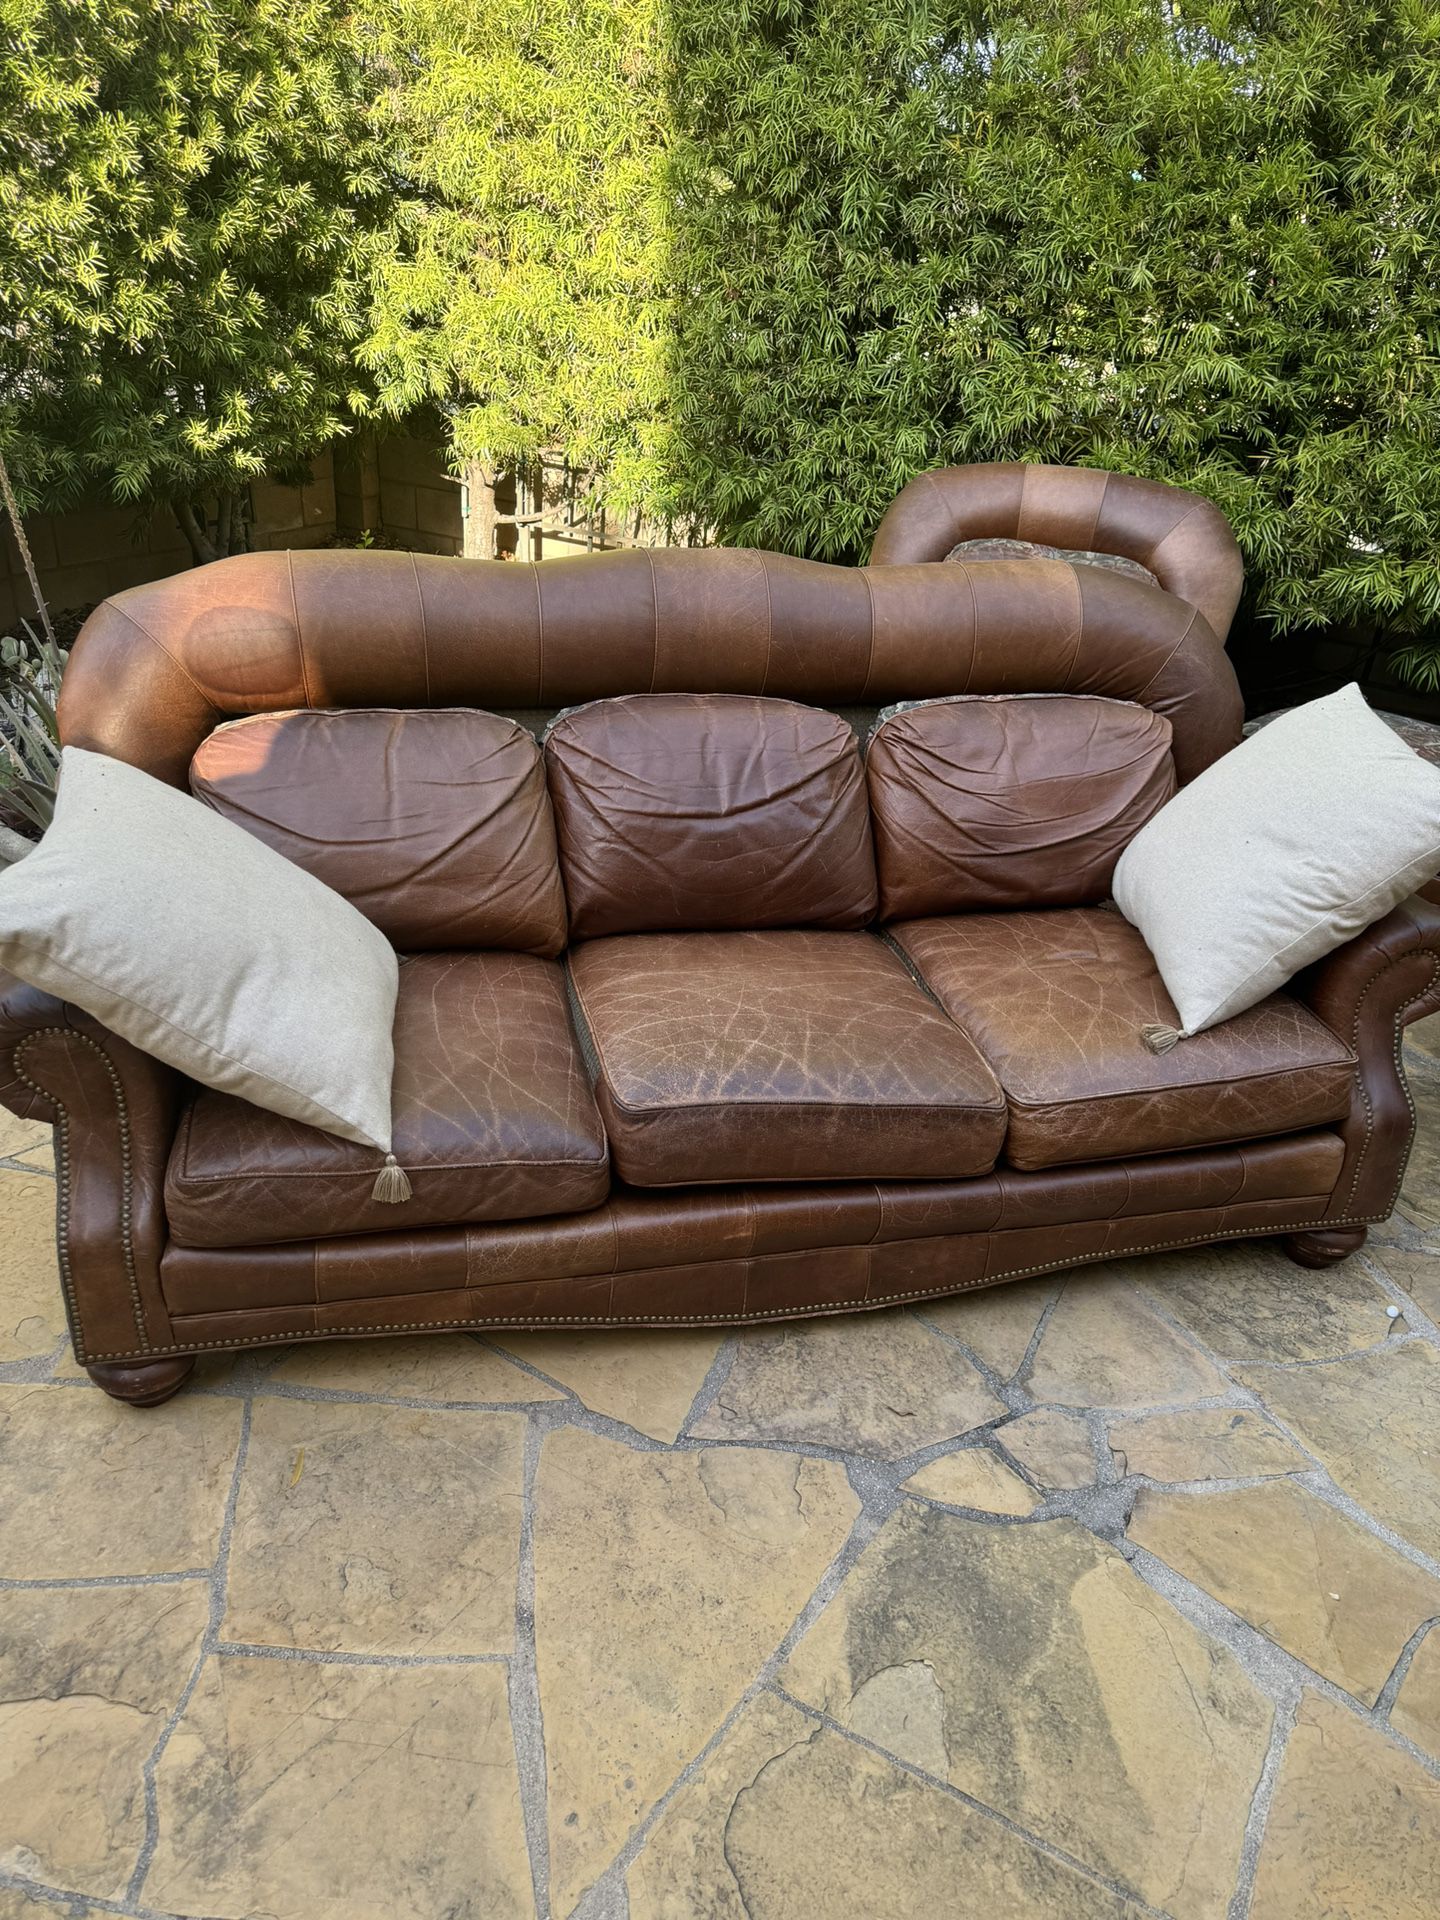 Leather Couch chair, and ottoman